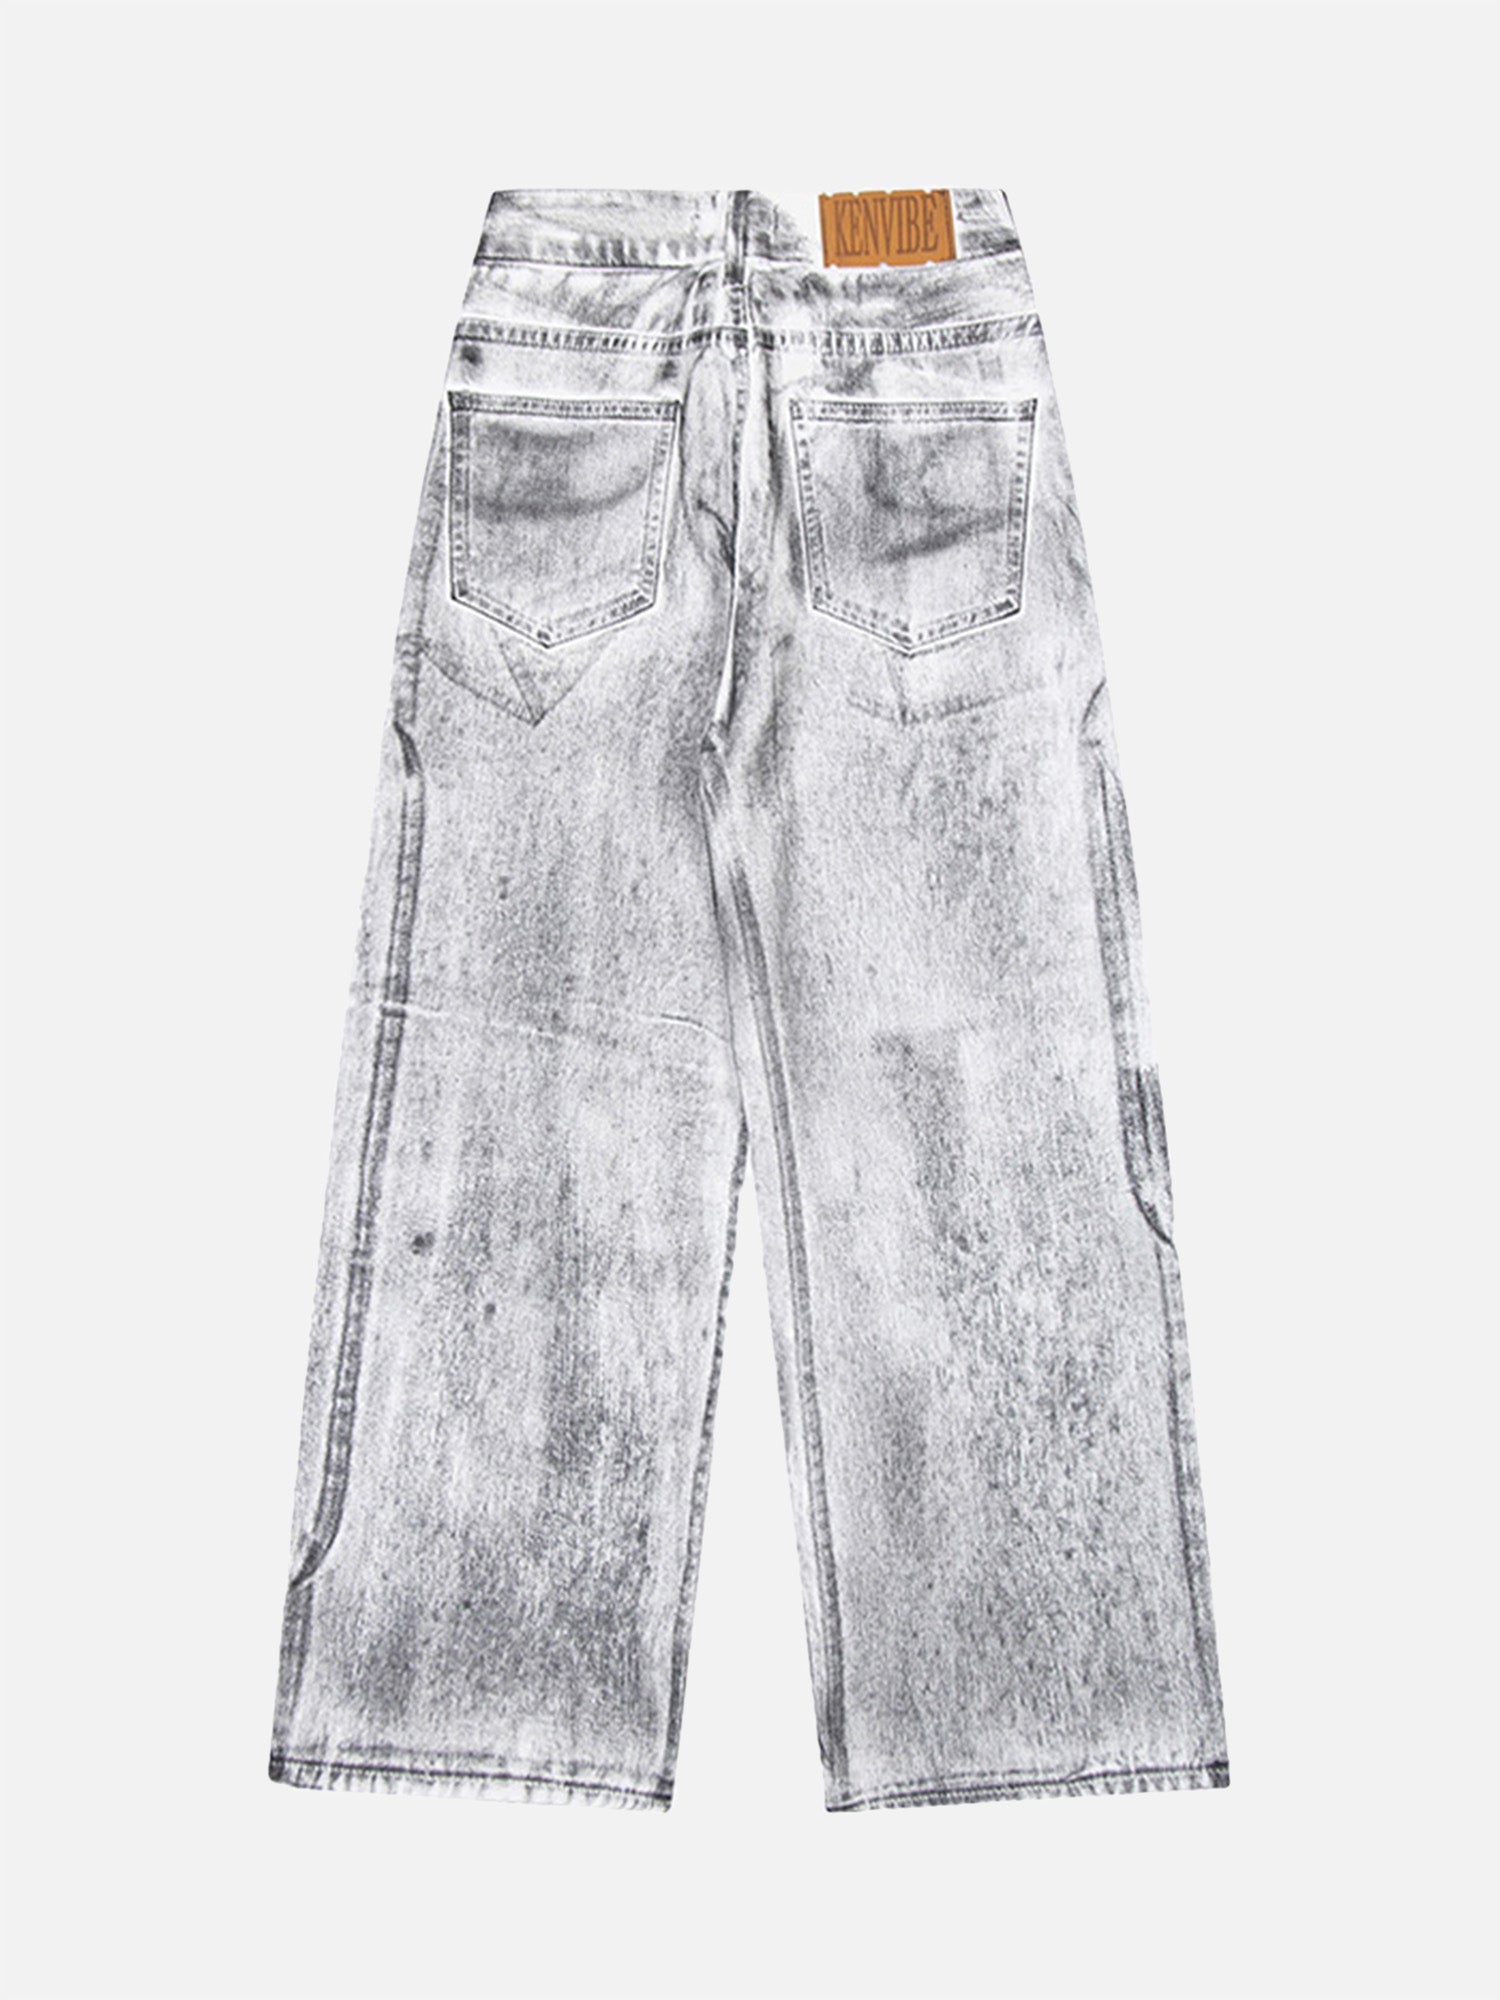 Wasteland Style Niche Design Dirty White Loose Jeans